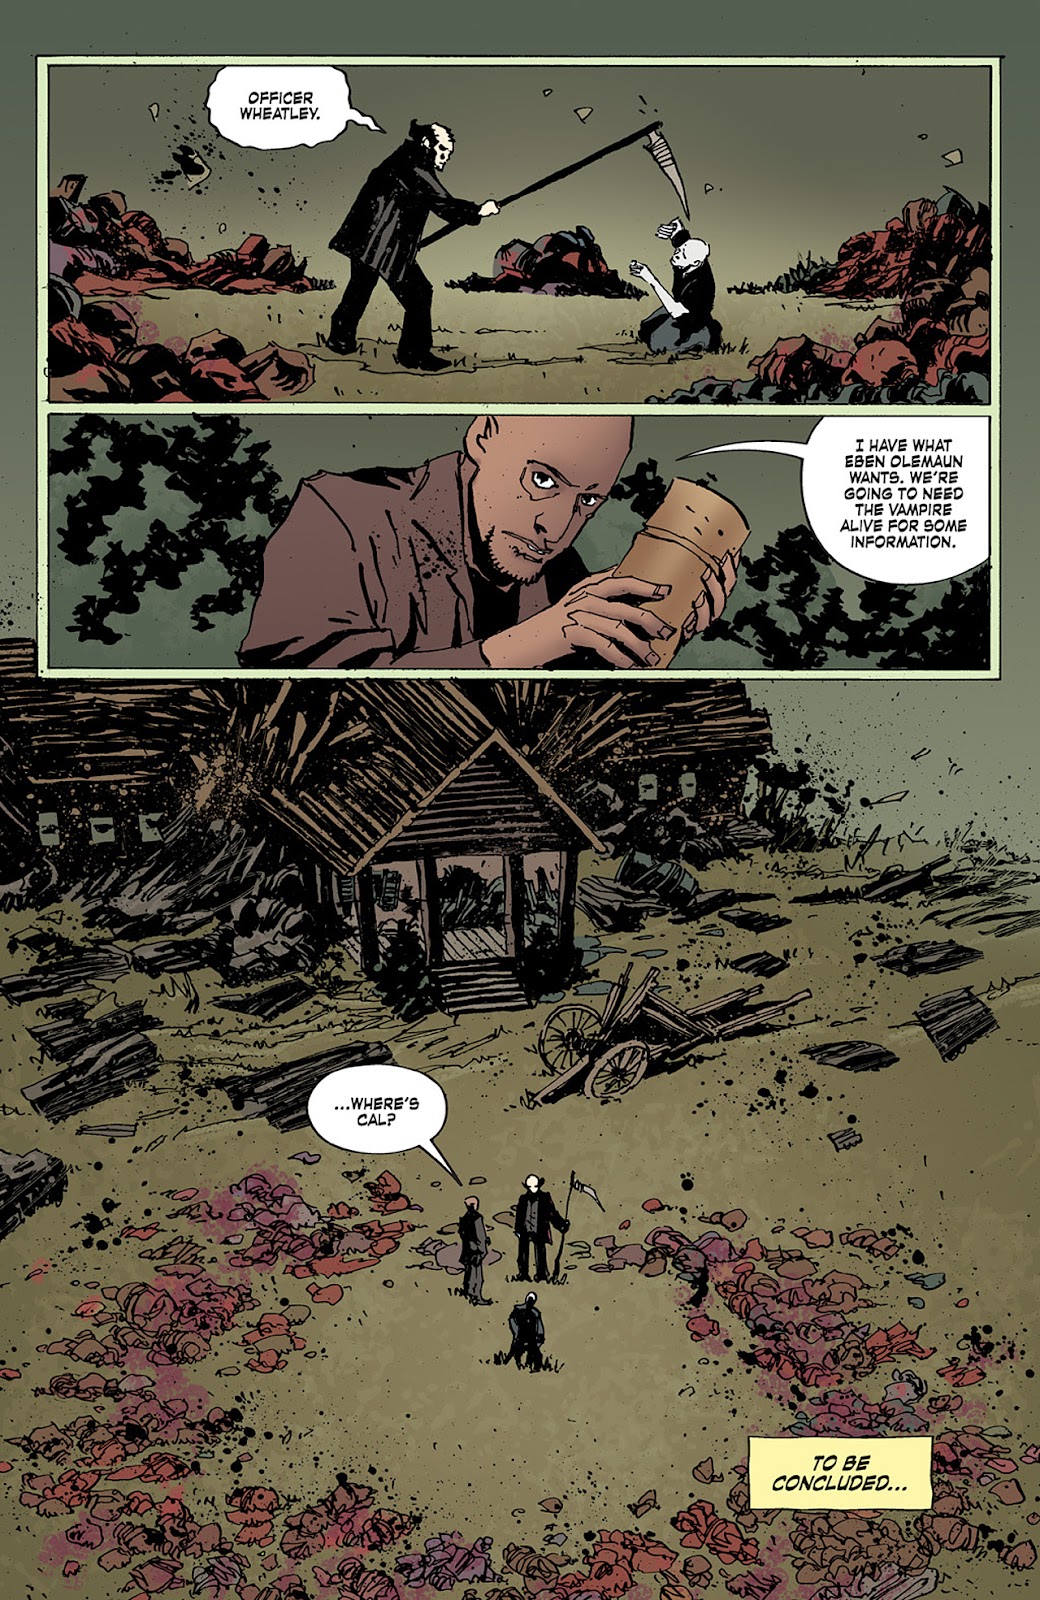 Criminal Macabre: Final Night - The 30 Days of Night Crossover issue 3 - Page 24